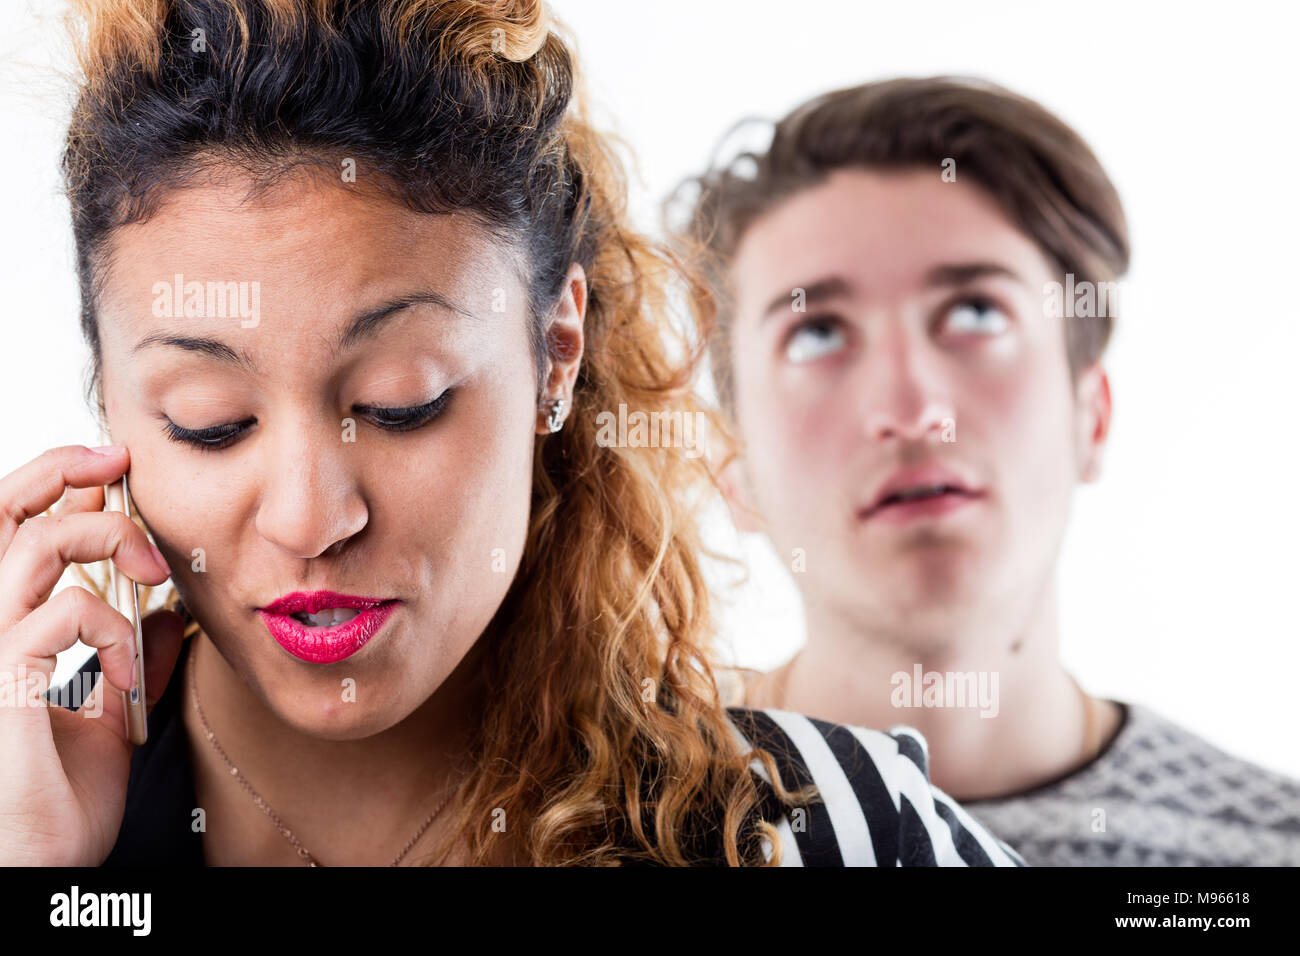 Talkative woman talking on phone while impatient man standing in background Stock Photo